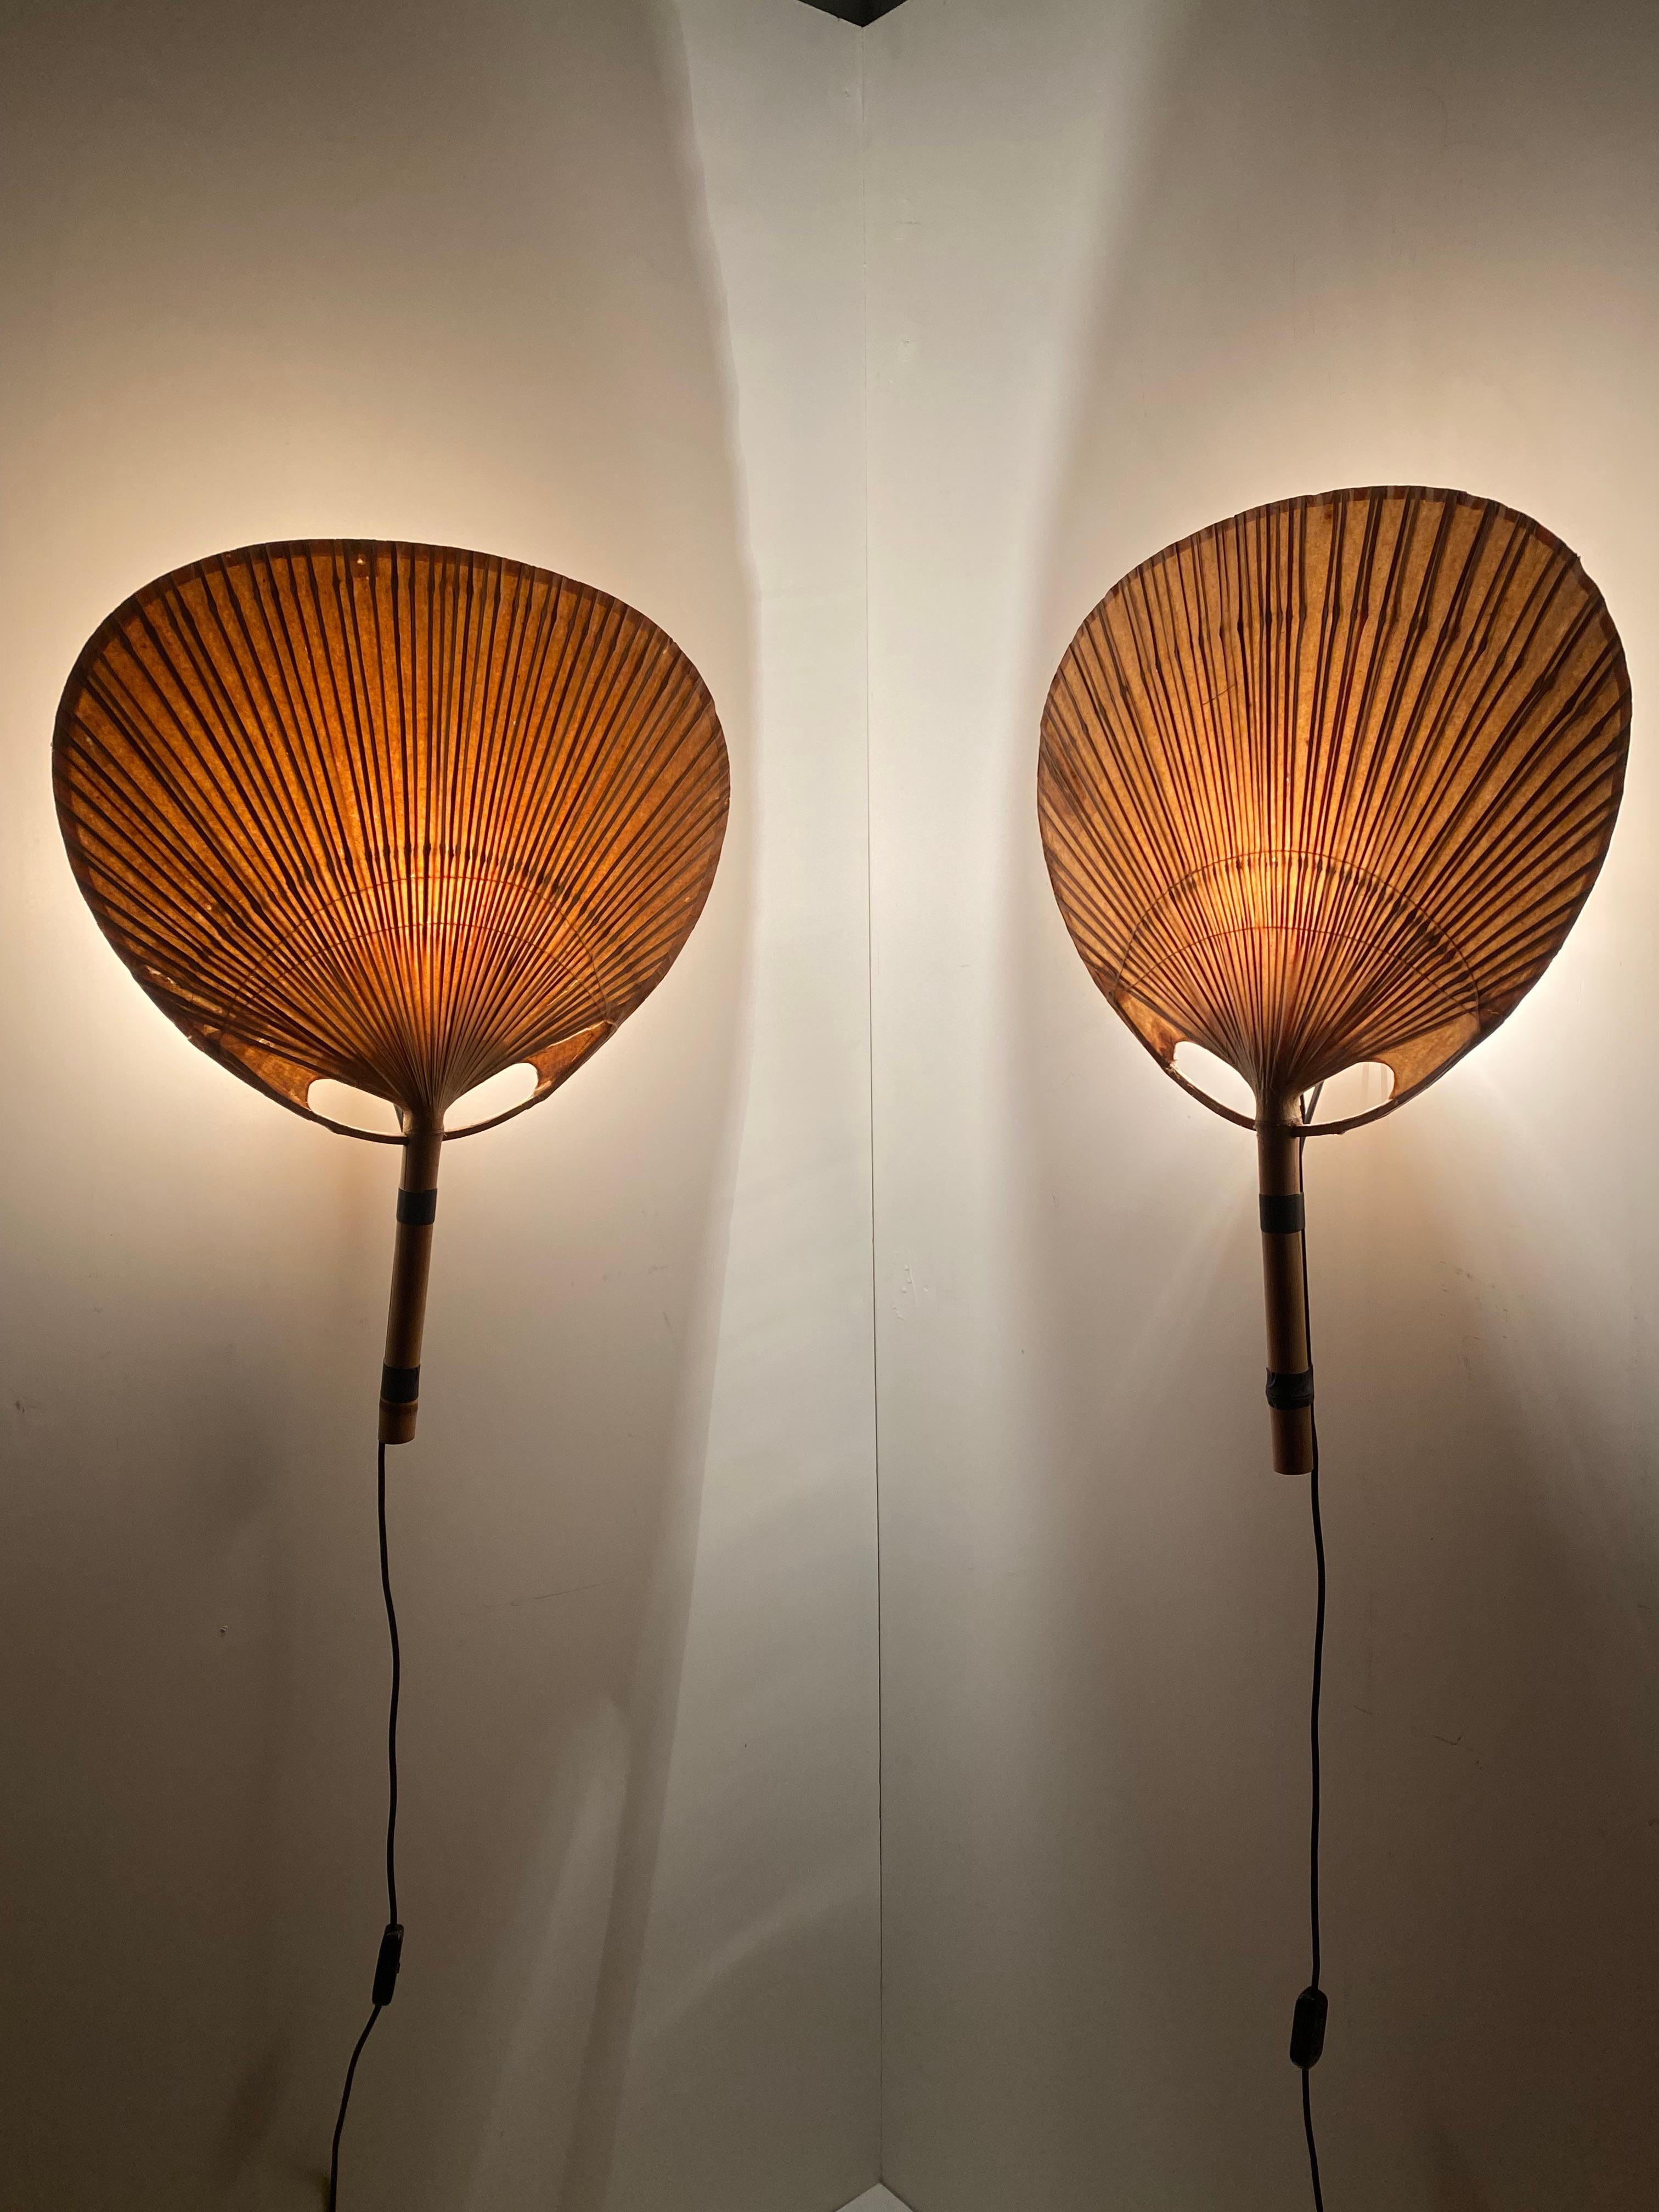 Pair of Uchiwa III wall appliques by Ingo Maurer for M-design Munich Germany 1973

The Uchiwa III is the medium sized version of the Uchiwa series and gives a very impressive diffuse light when lit. 
This stunning light was comprised of bamboo and